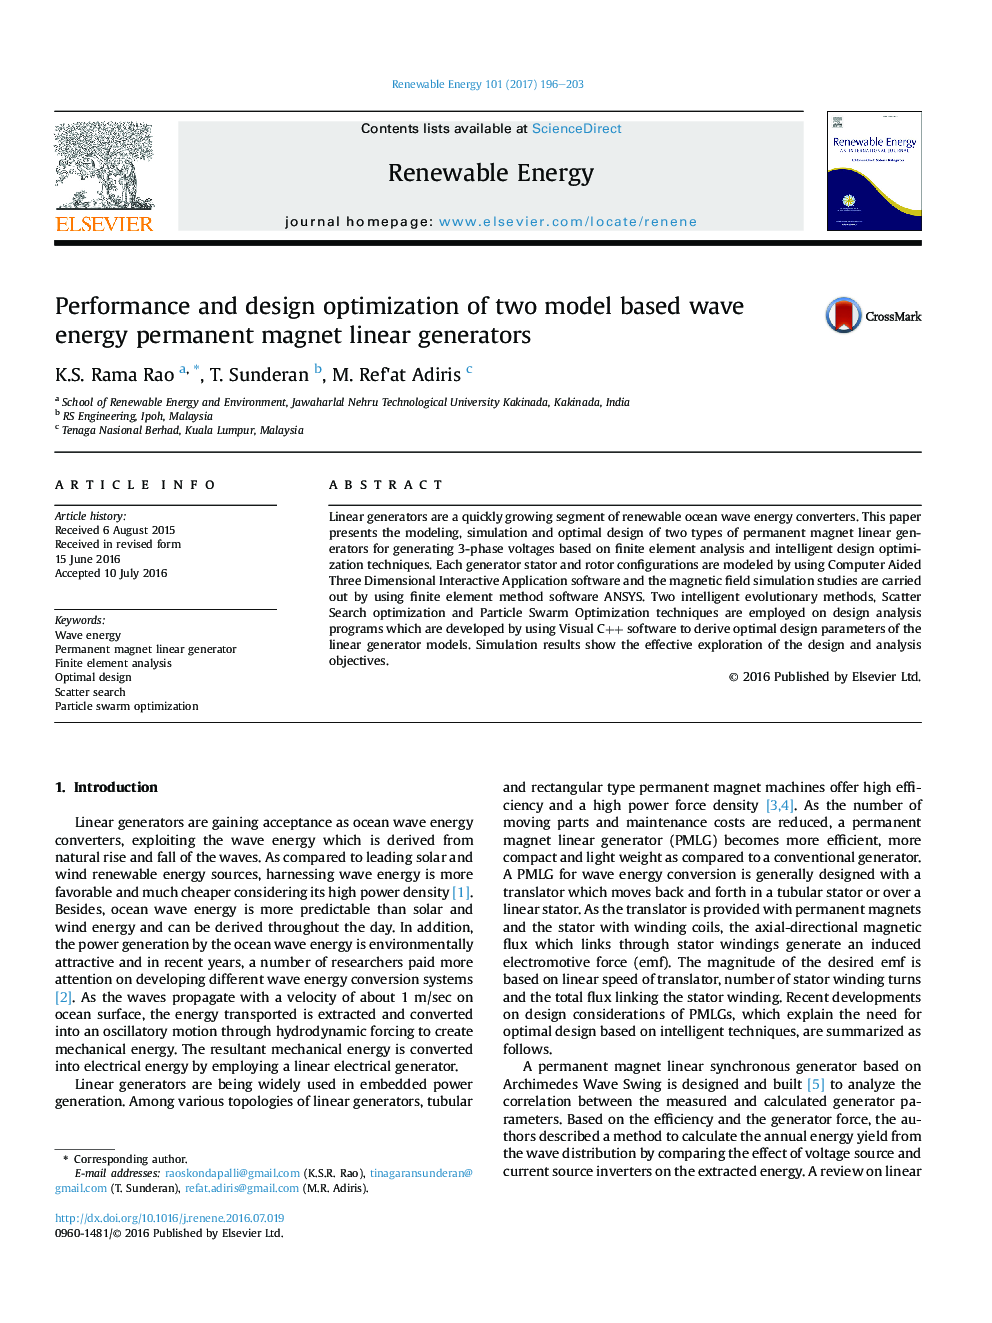 Performance and design optimization of two model based wave energy permanent magnet linear generators